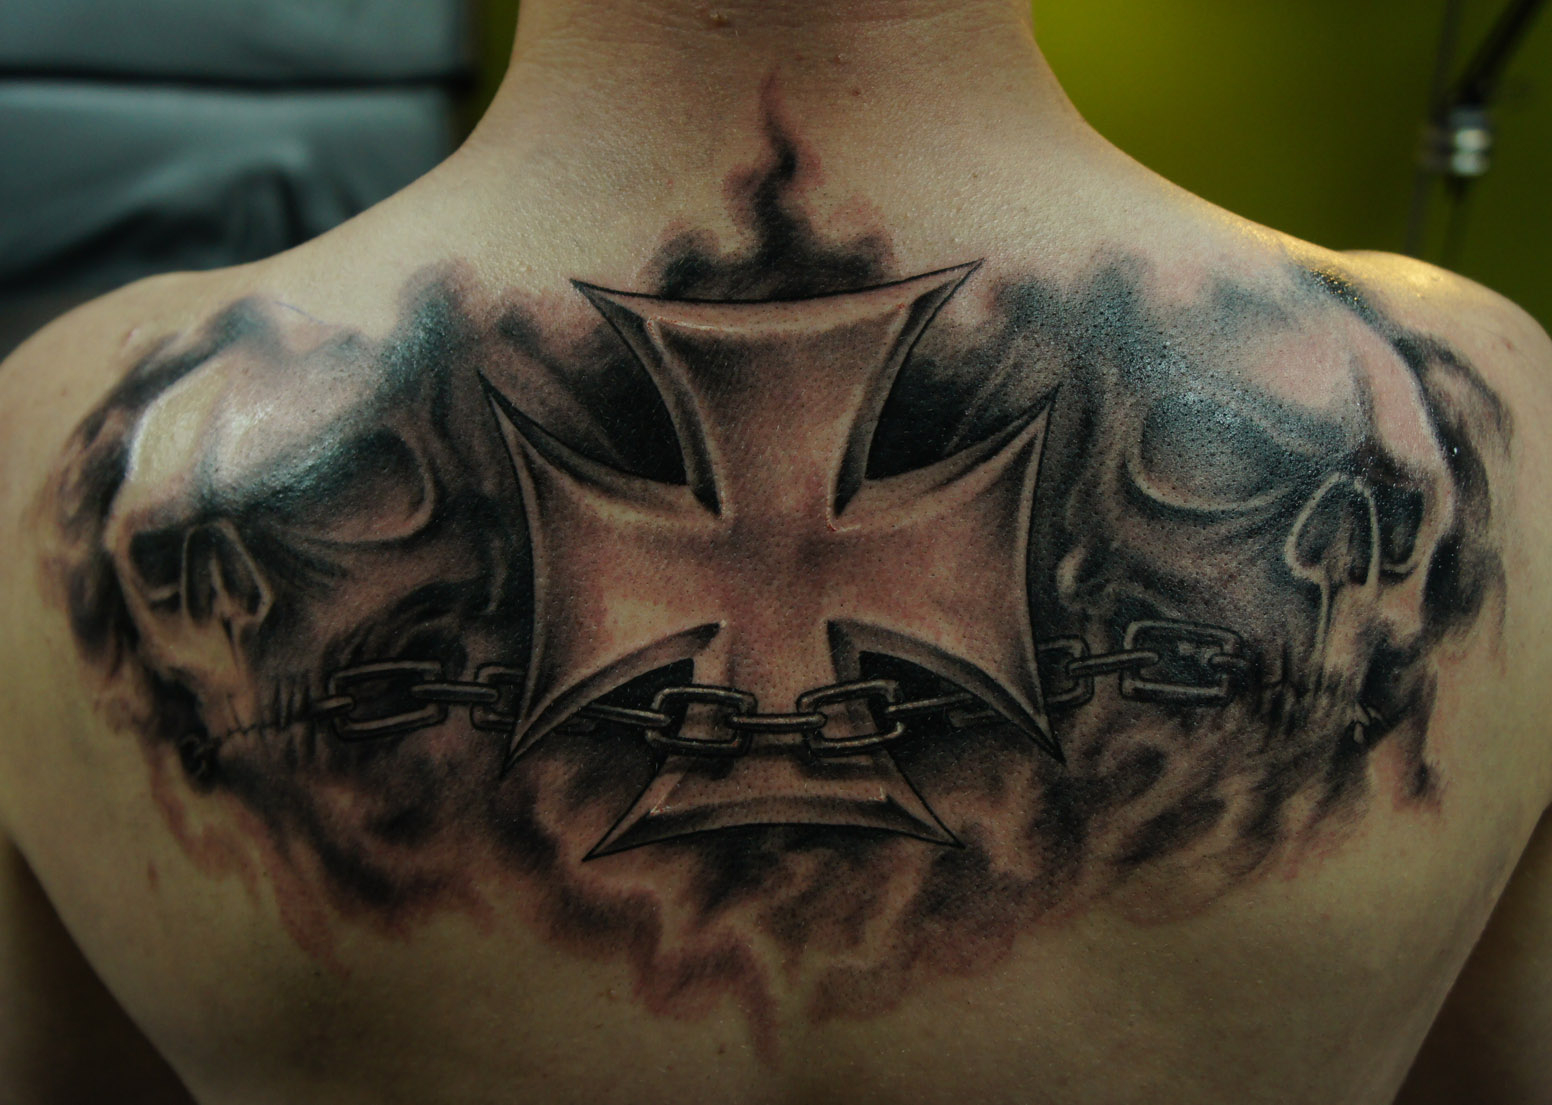 Beautiful German Iron Cross Tattoos Design Idea intended for proportions 1552 X 1105